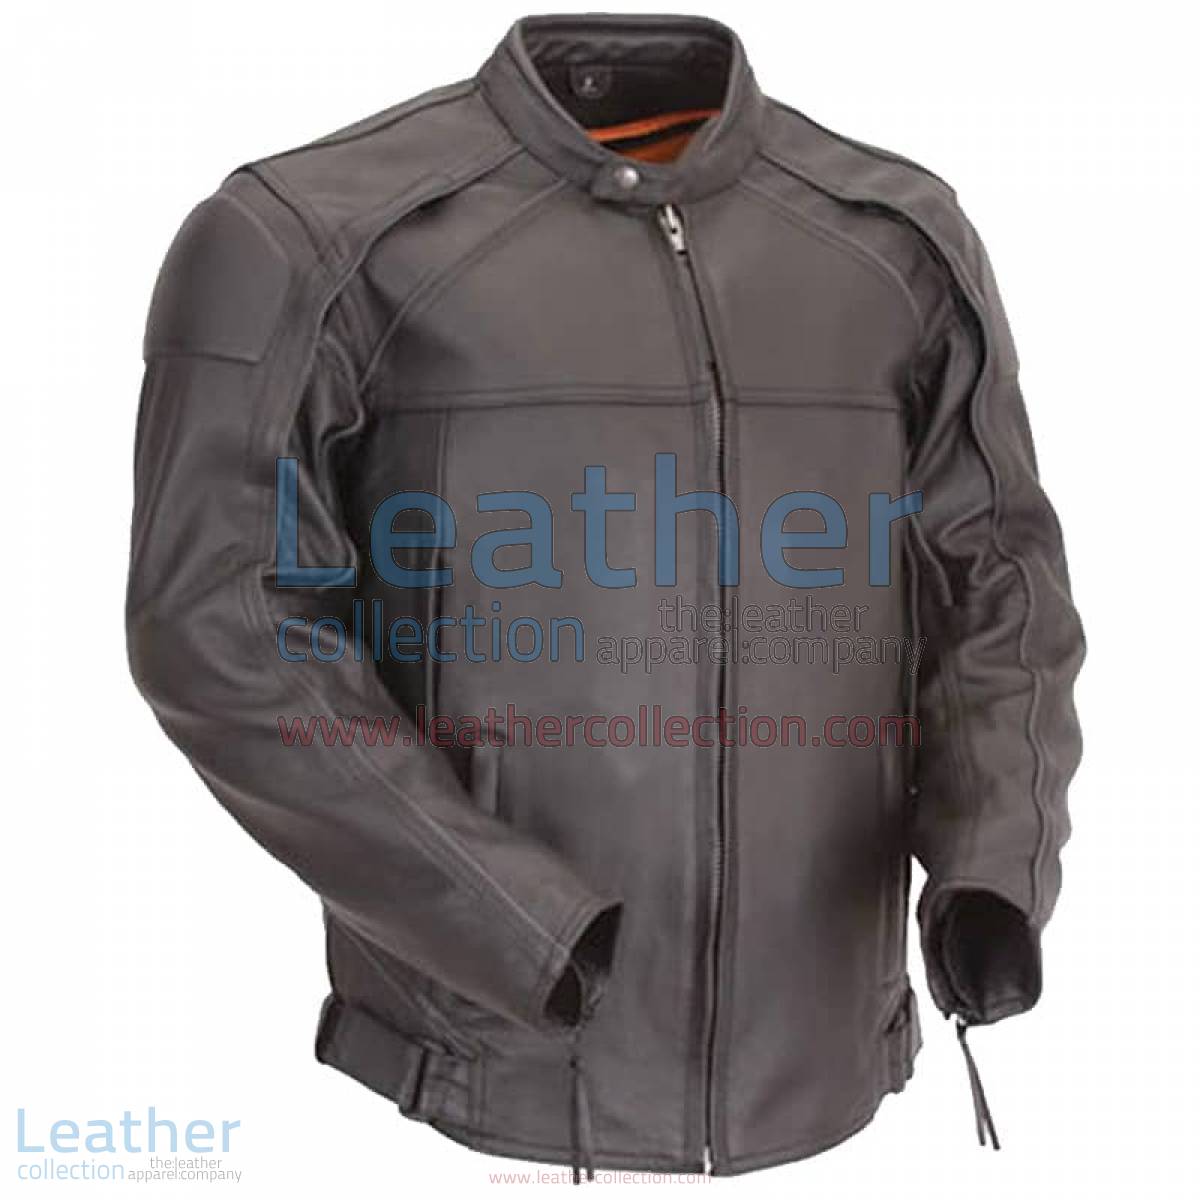 Leather Motorcycle Jacket with Reflective Piping